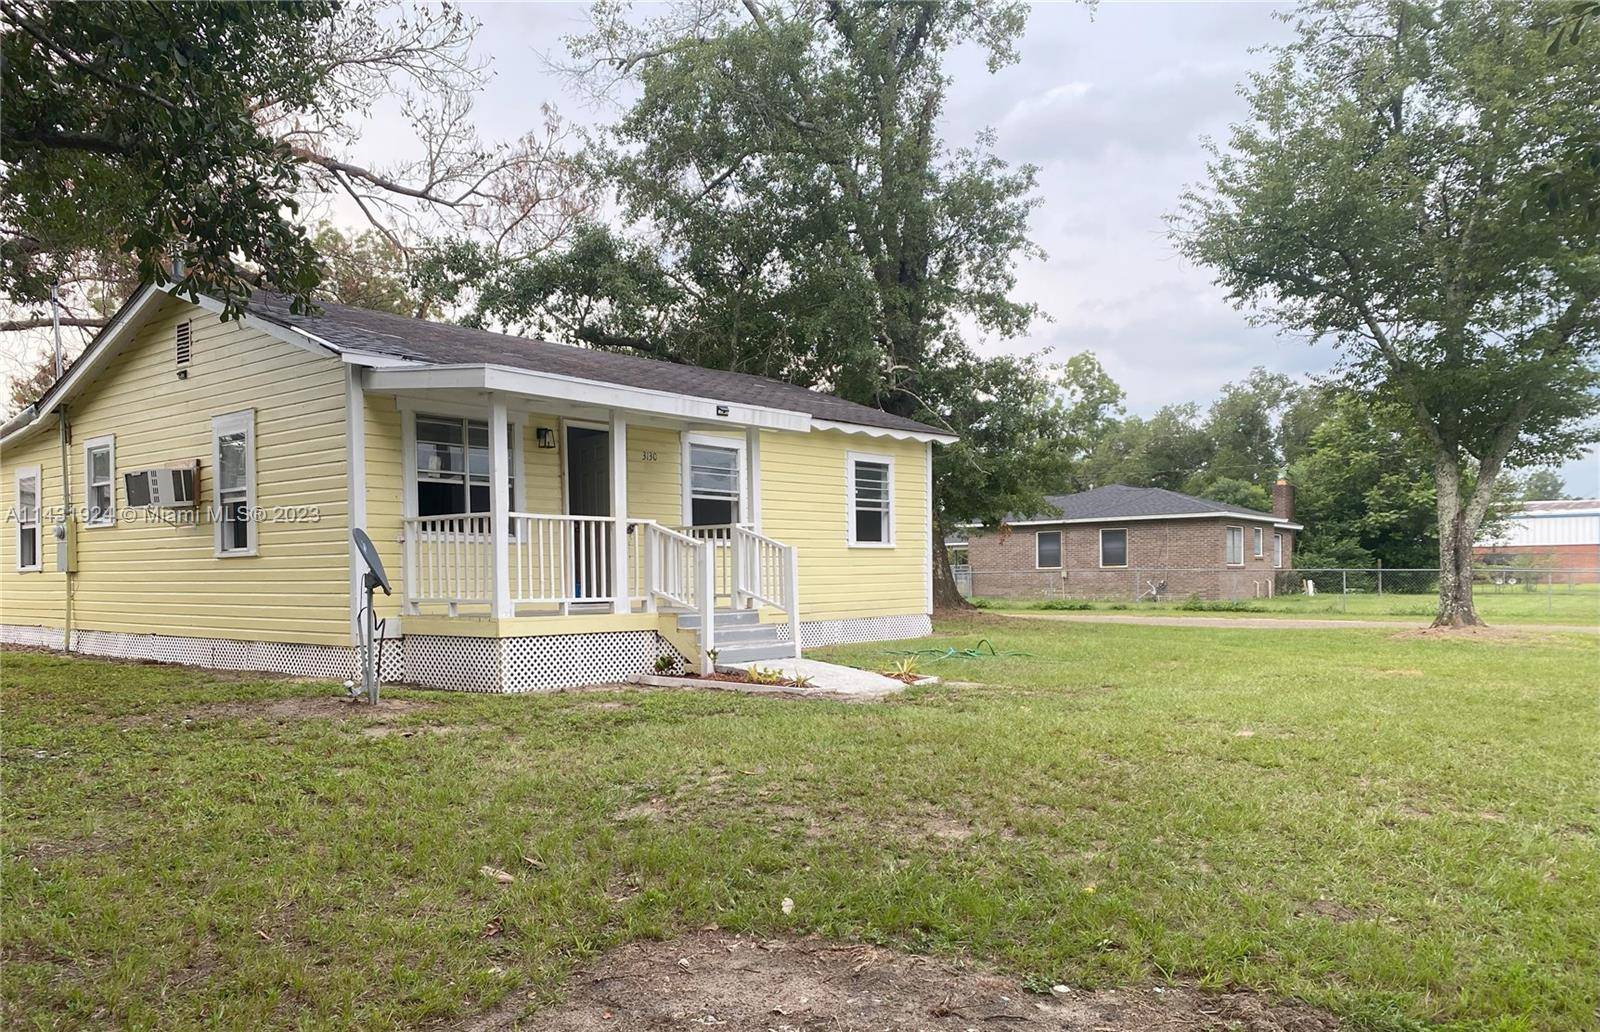 COTTONDALE, FL Beautiful single family home for sale !